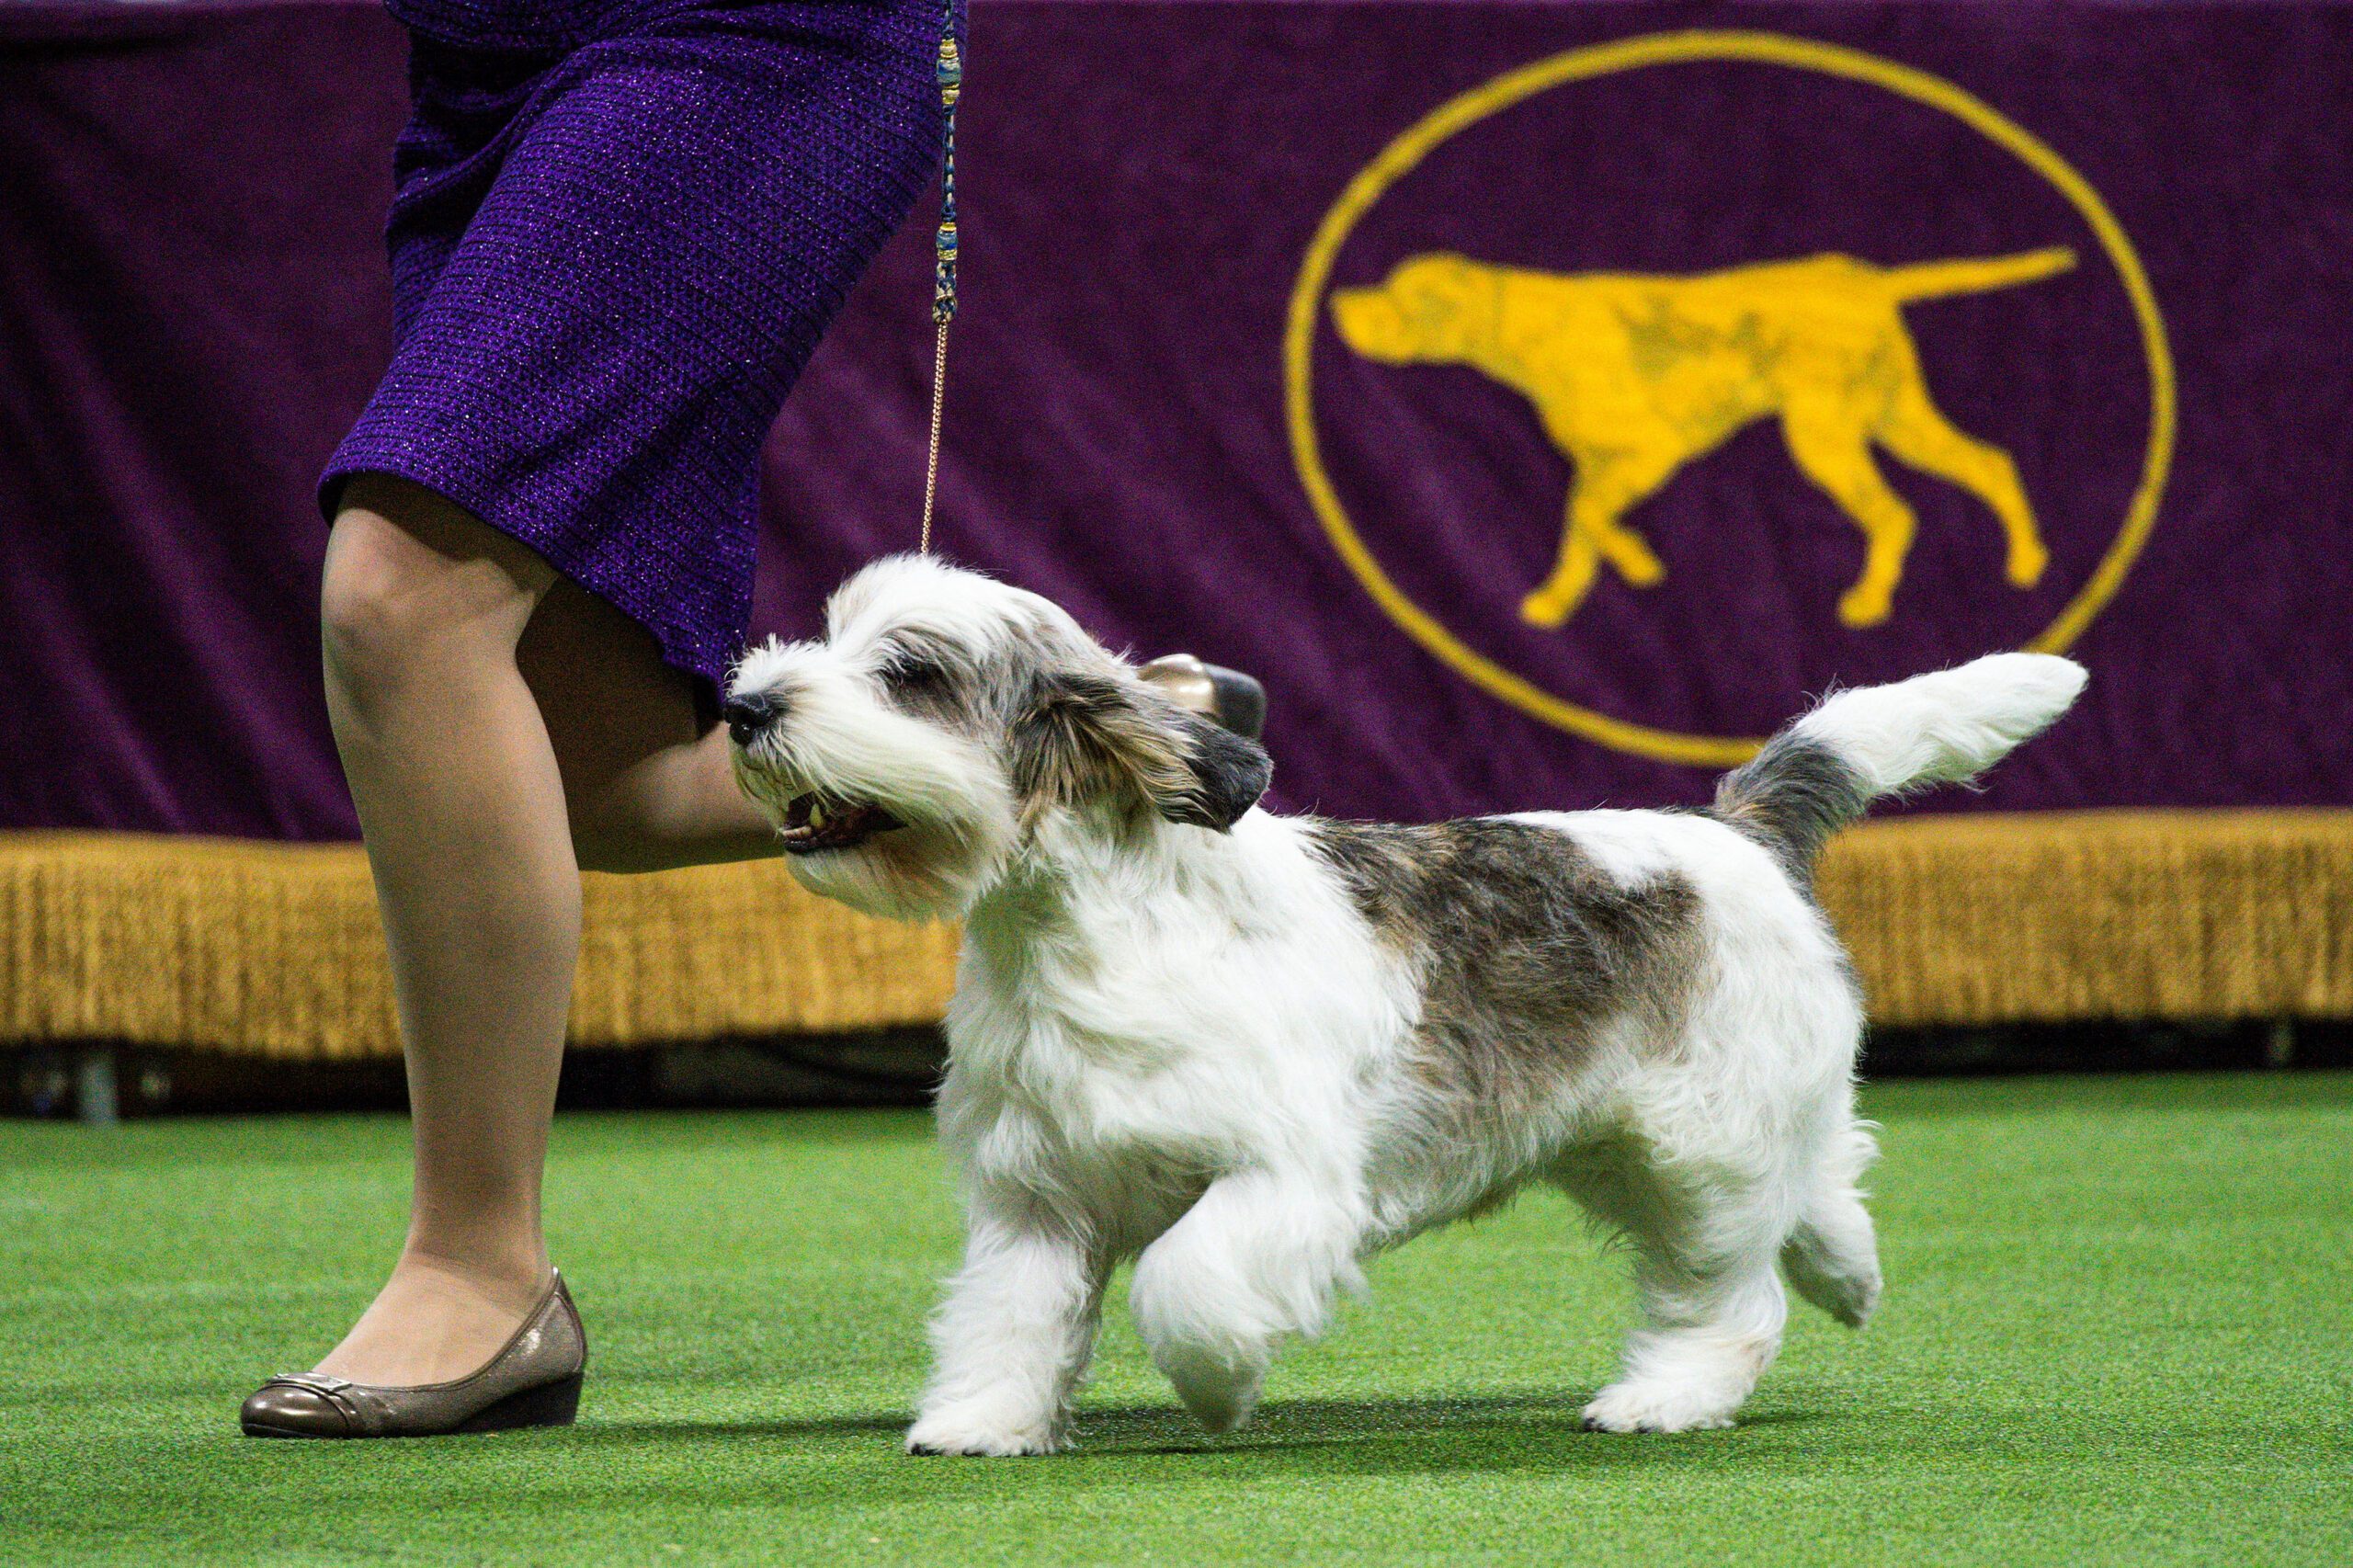 Dog named Buddy Holly is first of its breed to win Westminster Dog Show